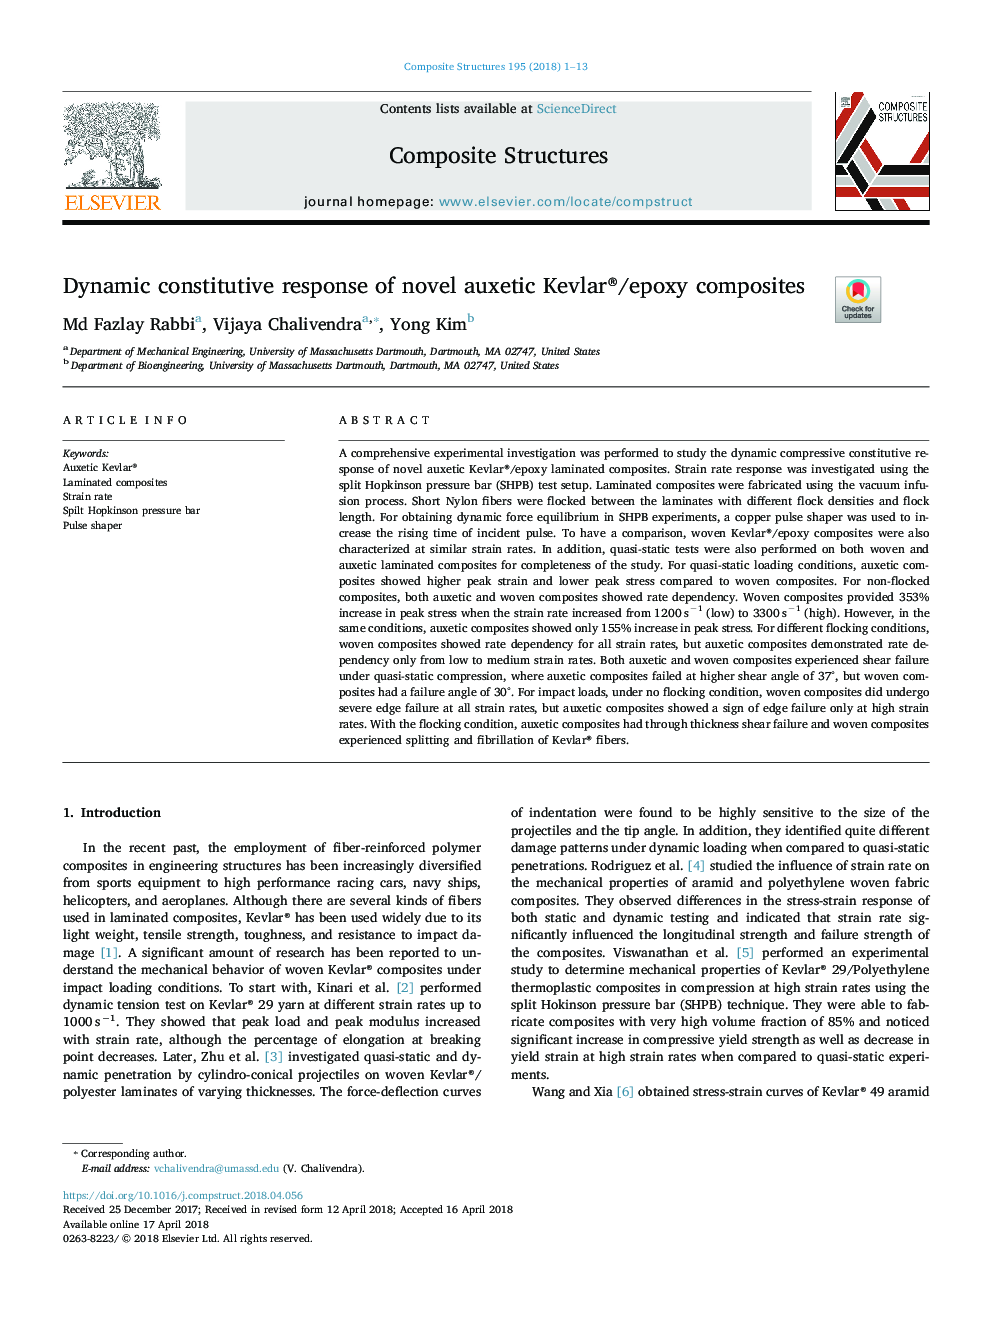 Dynamic constitutive response of novel auxetic Kevlar®/epoxy composites